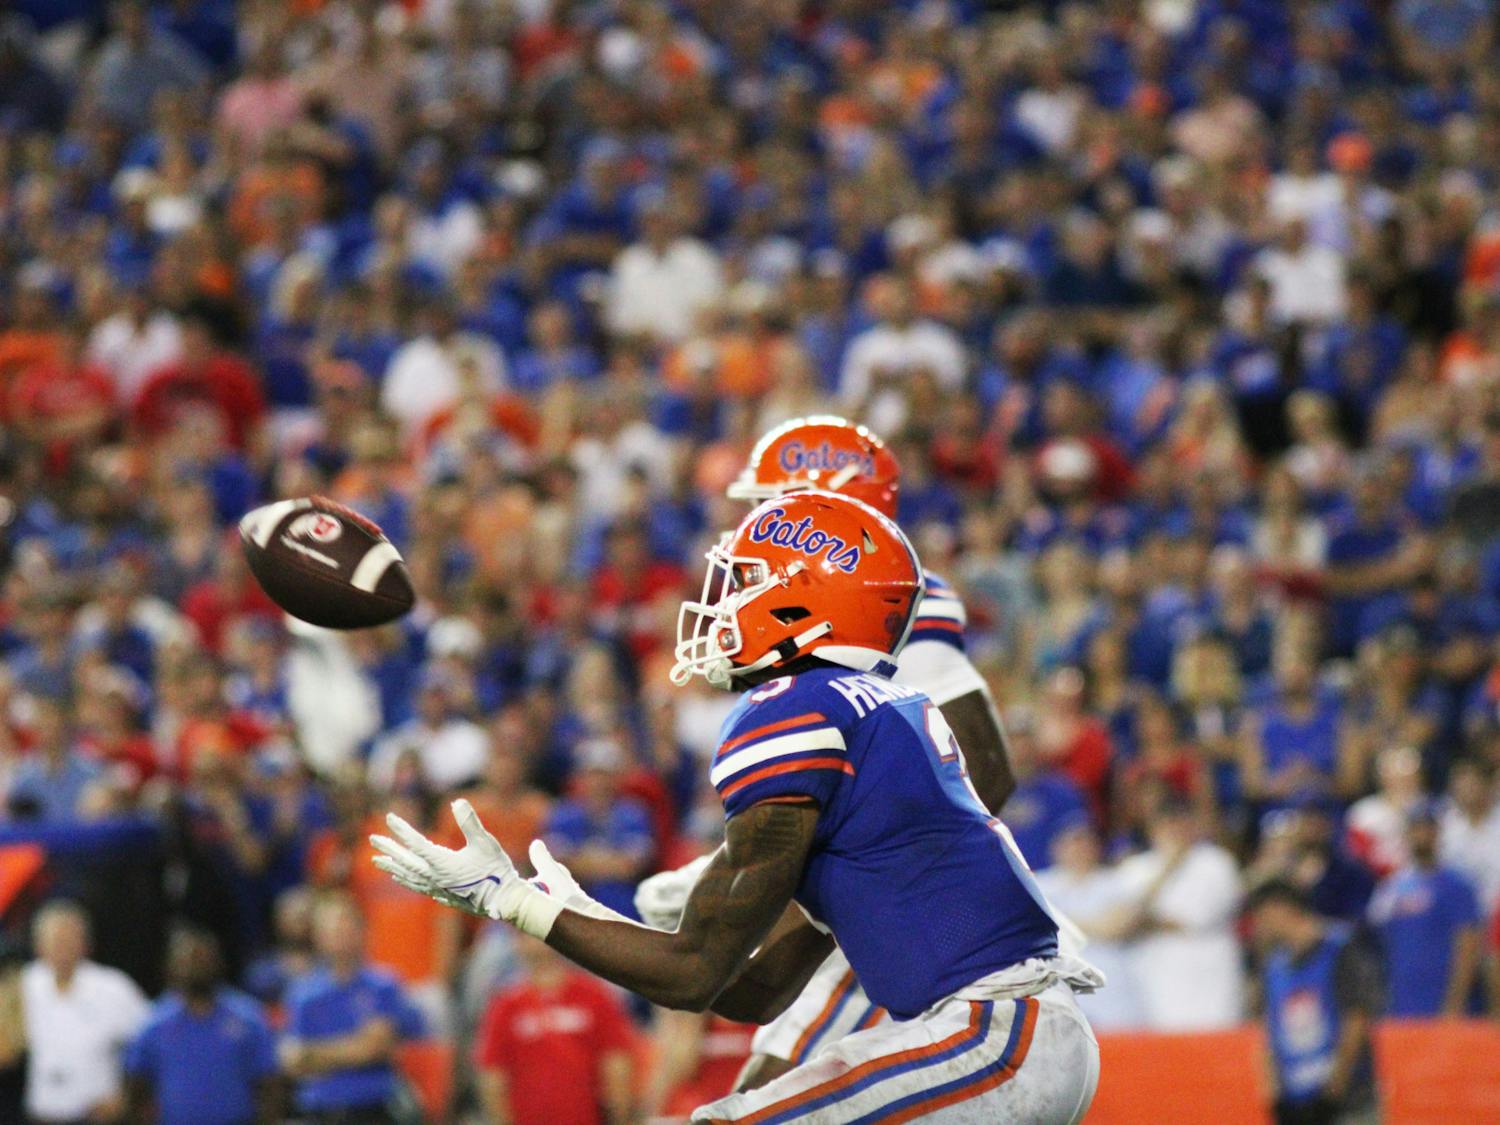 The Florida Gators held off the No. 7 Utah Utes 29-26 in the first game of the season Saturday. The team was backed by 90,799 fans in Ben Hill Griffin Stadium — the most ever for a UF season opener, 10th most in program history and 2,251 more than the listed capacity.